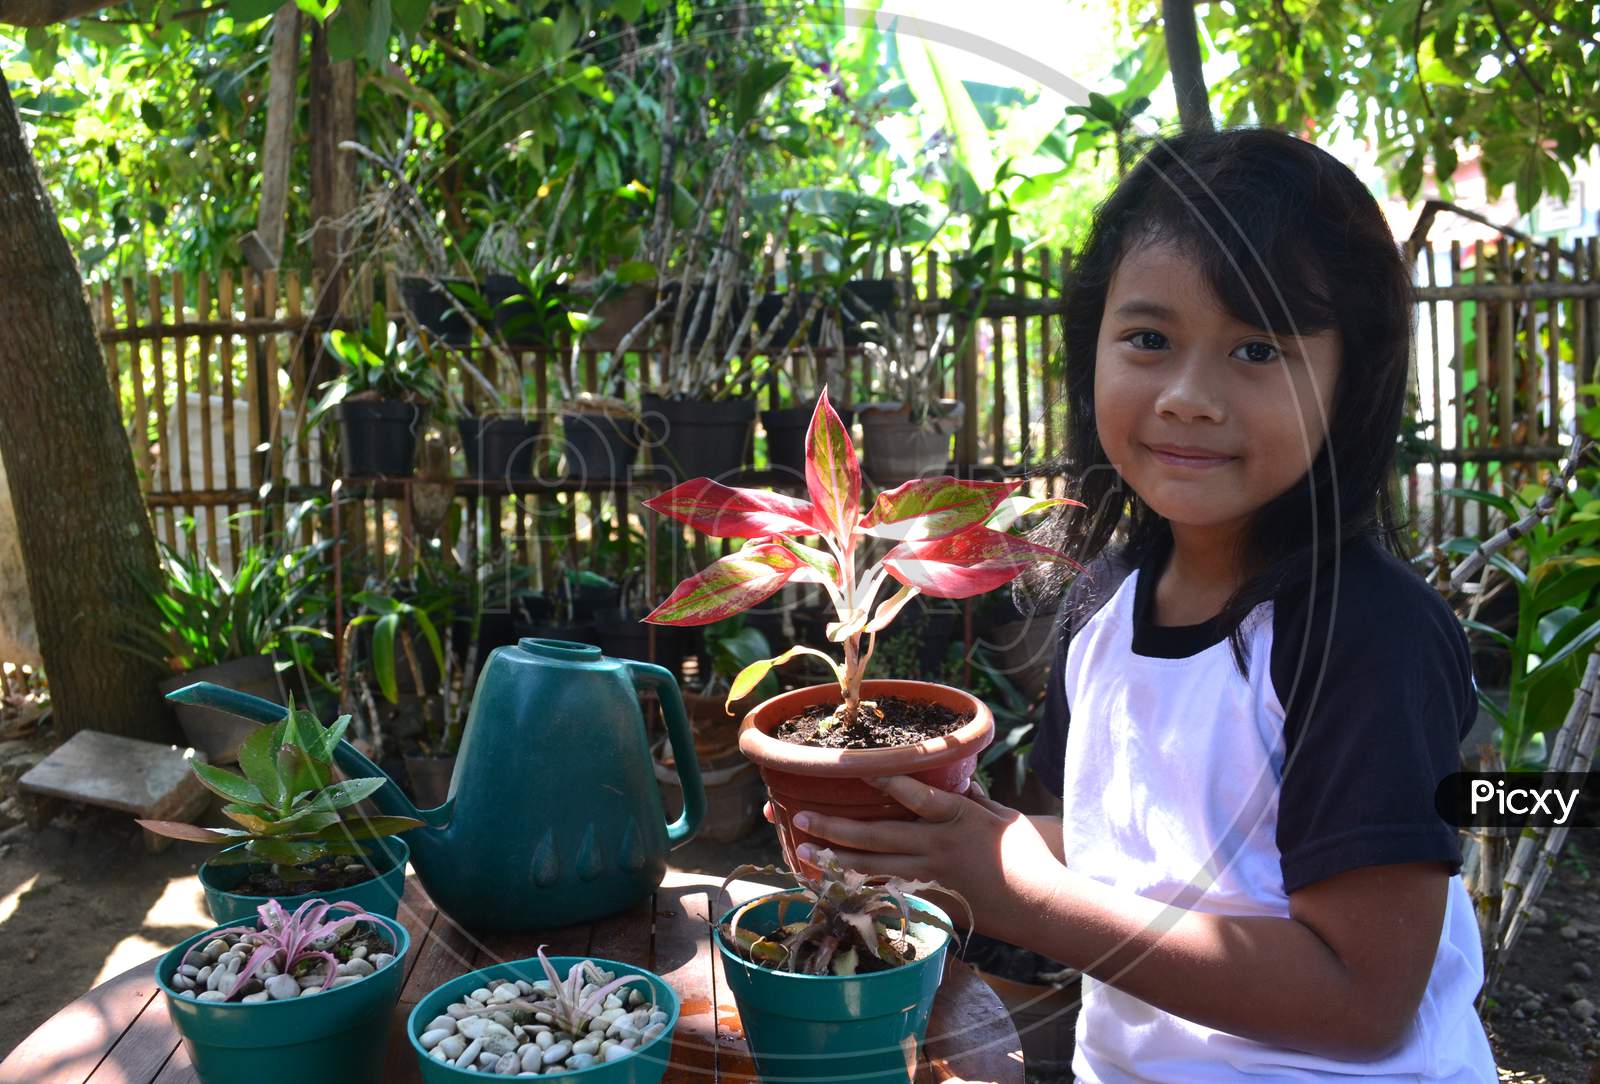 Smiling Beautiful Little Girl Sit While Holding A Potted Plant Looking At The Camera